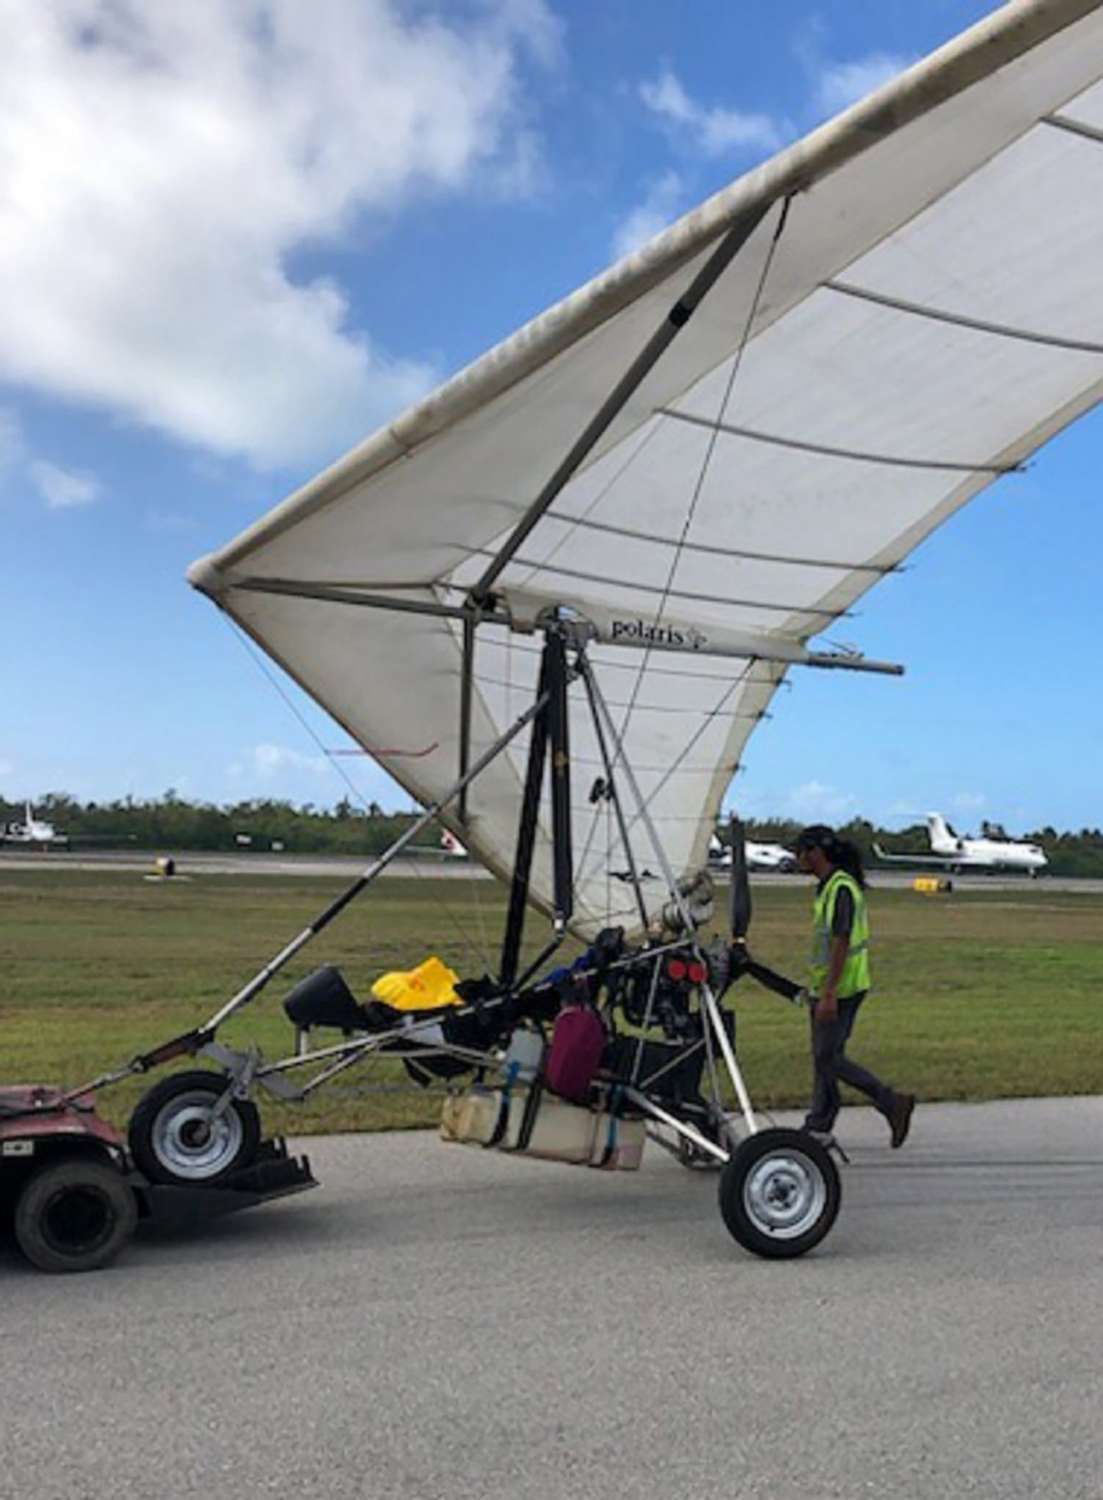 PHOTO: Two Cuban migrants were taken into U.S. Border Patrol custody after landing at the Key West International Airport onboard a powered hang glider, Mar. 25, 2023.